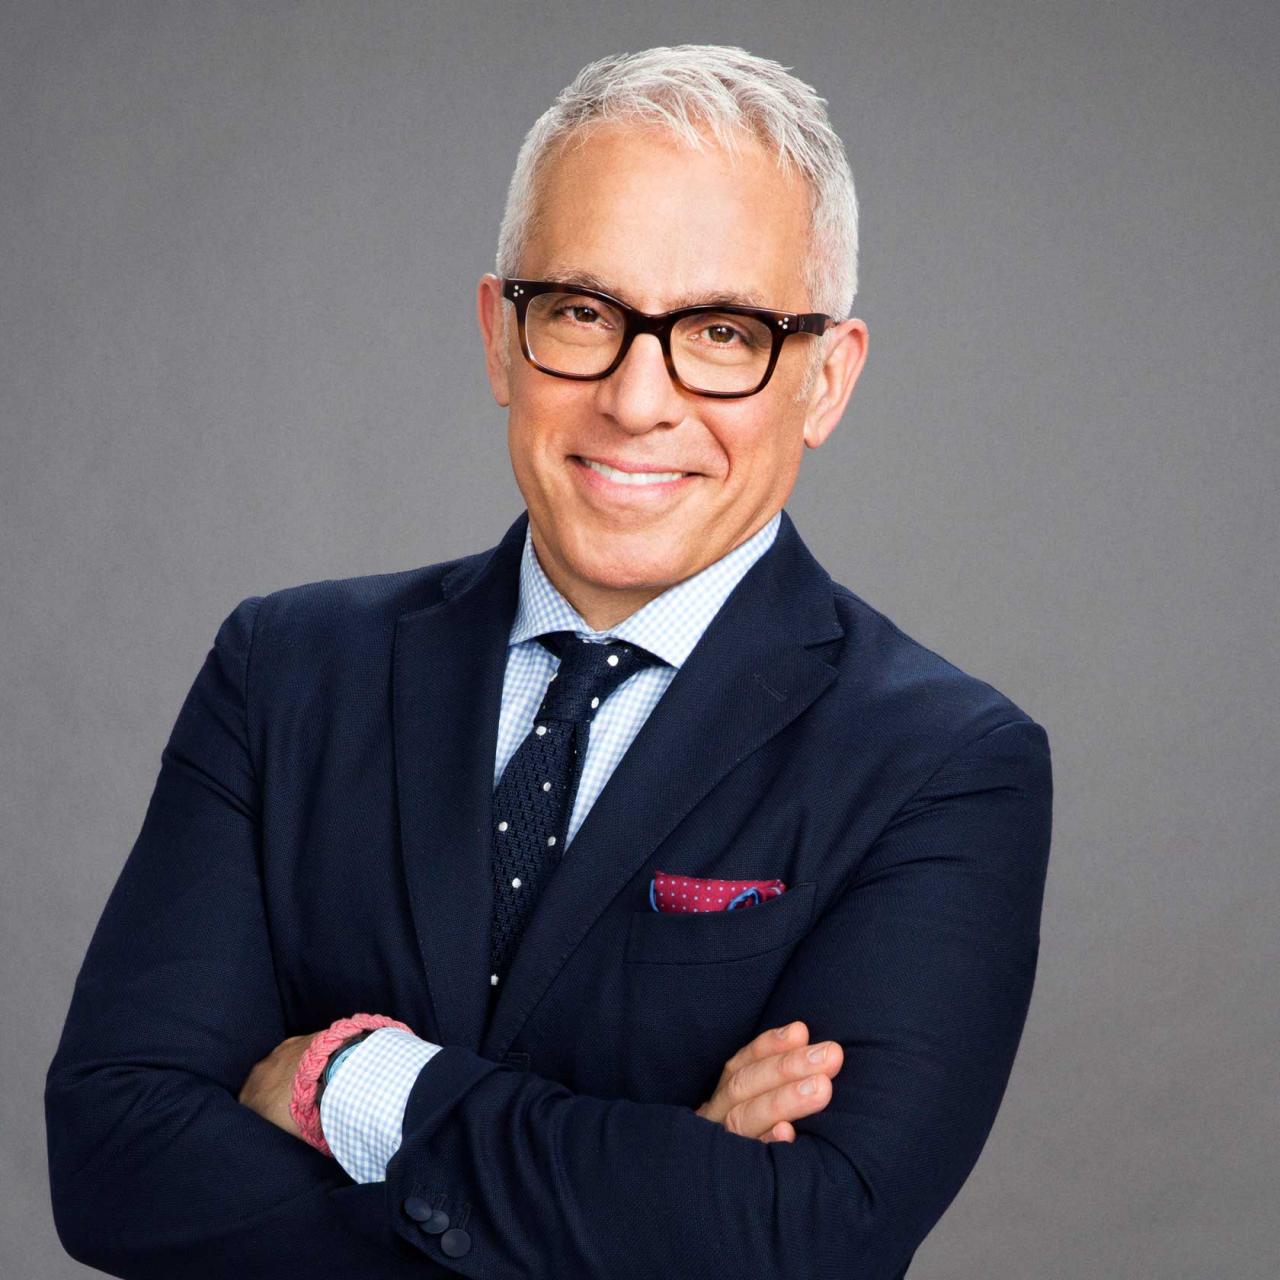 Geoffrey Zakarian - Today is the day! Join me on @qvc at noon to